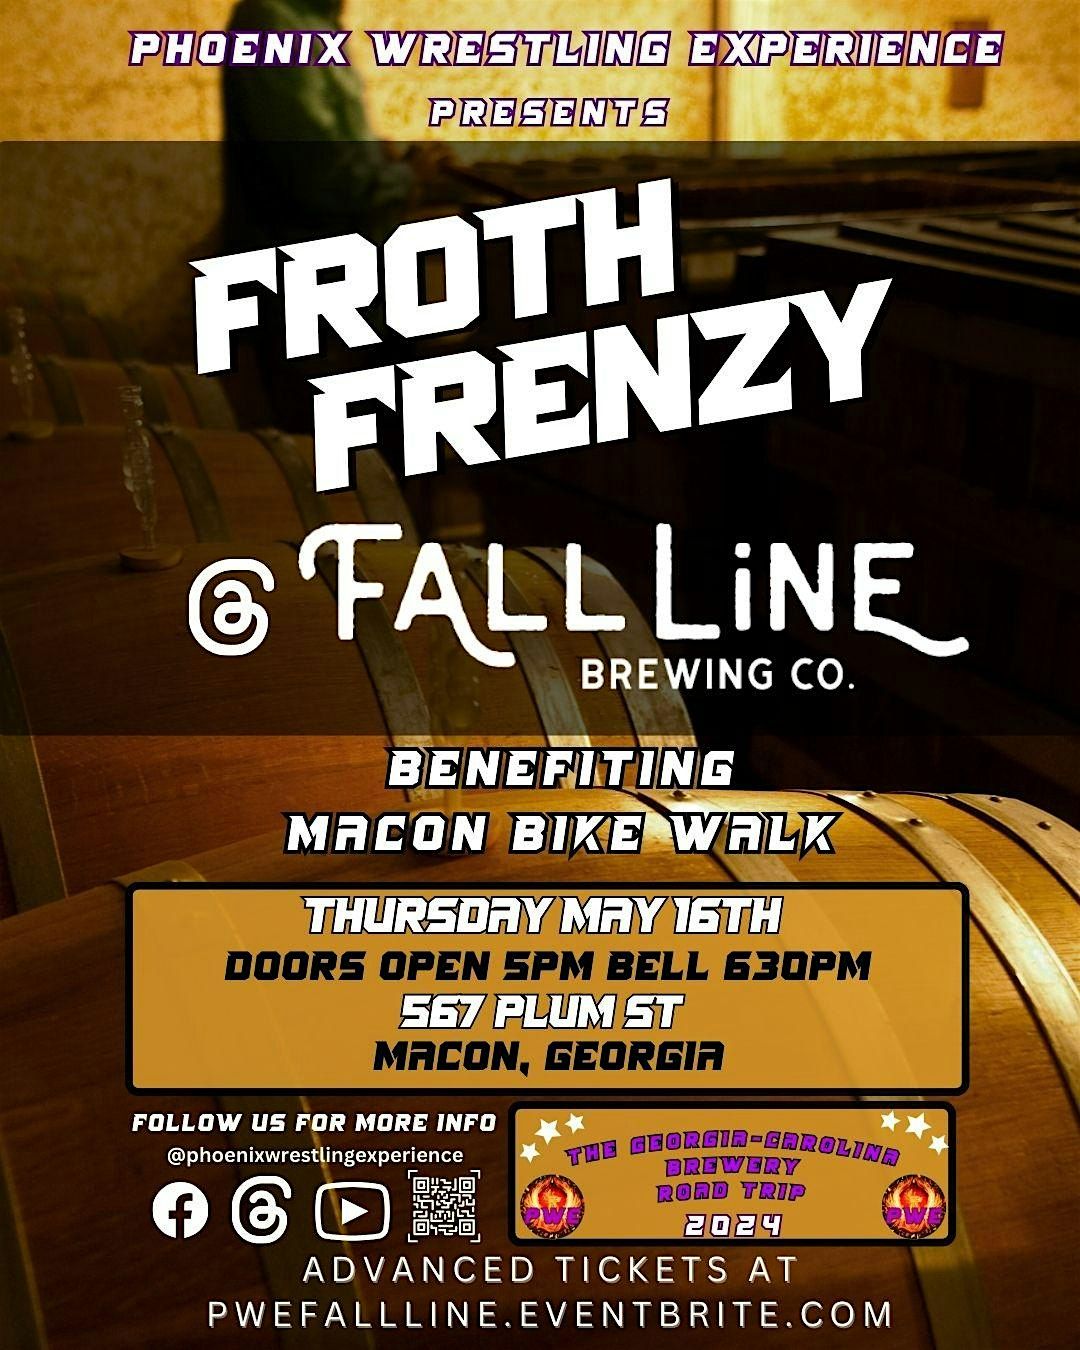 PWE Presents: Froth Frenzy at Fall Line